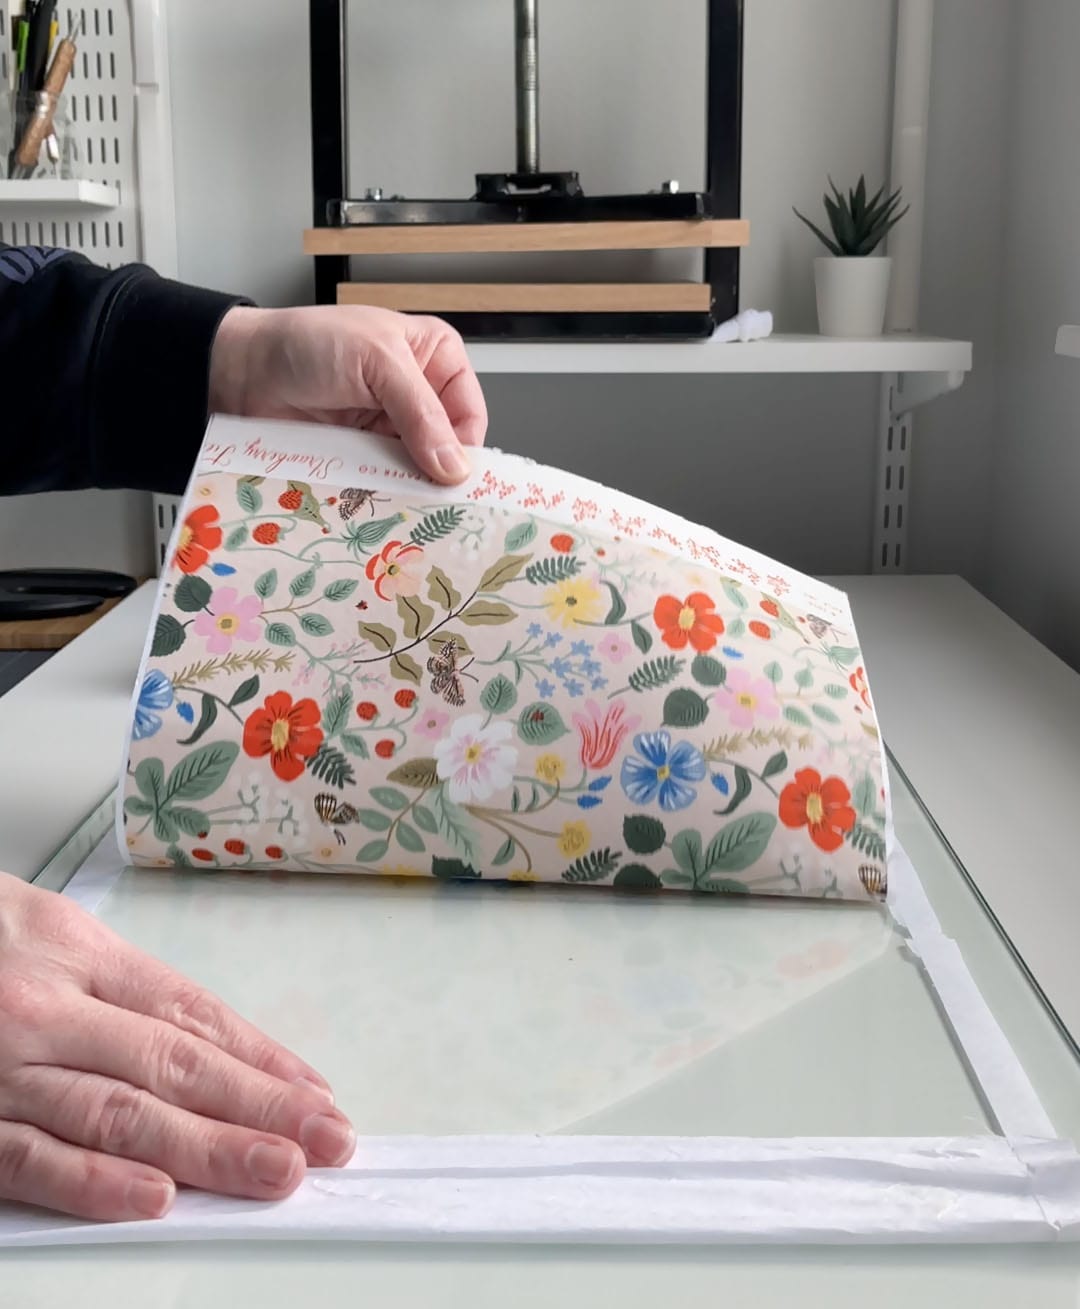 remove finished book cloth from the glass surface